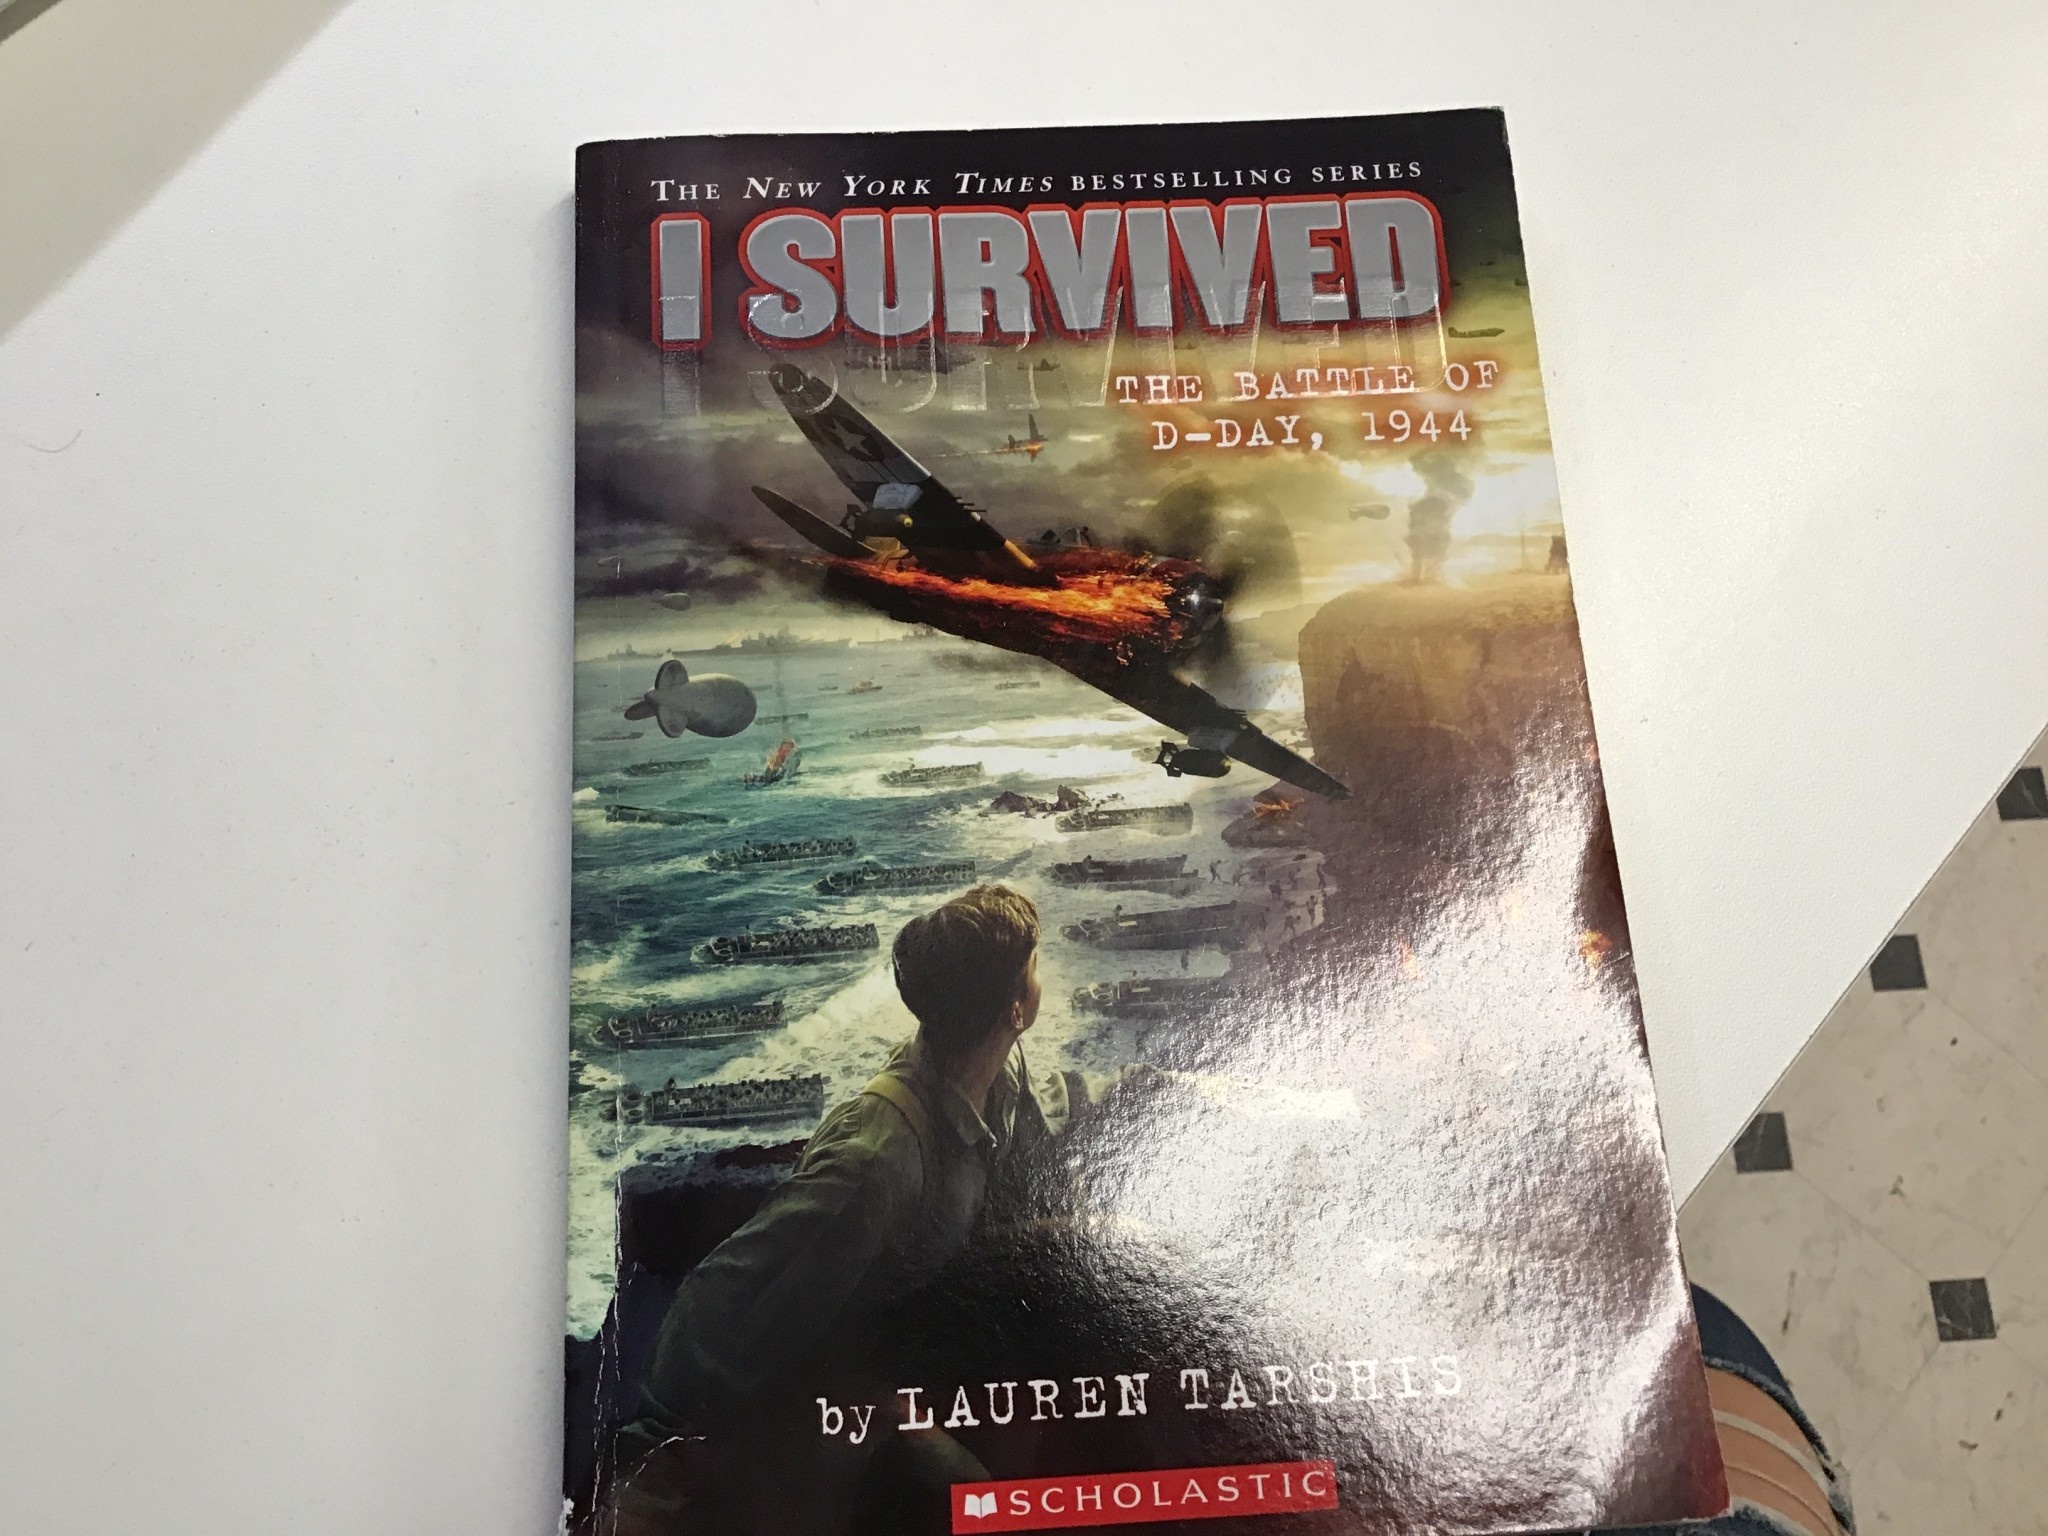 I Survived the Battle of D-Day, 1944 by Lauren Tarshis